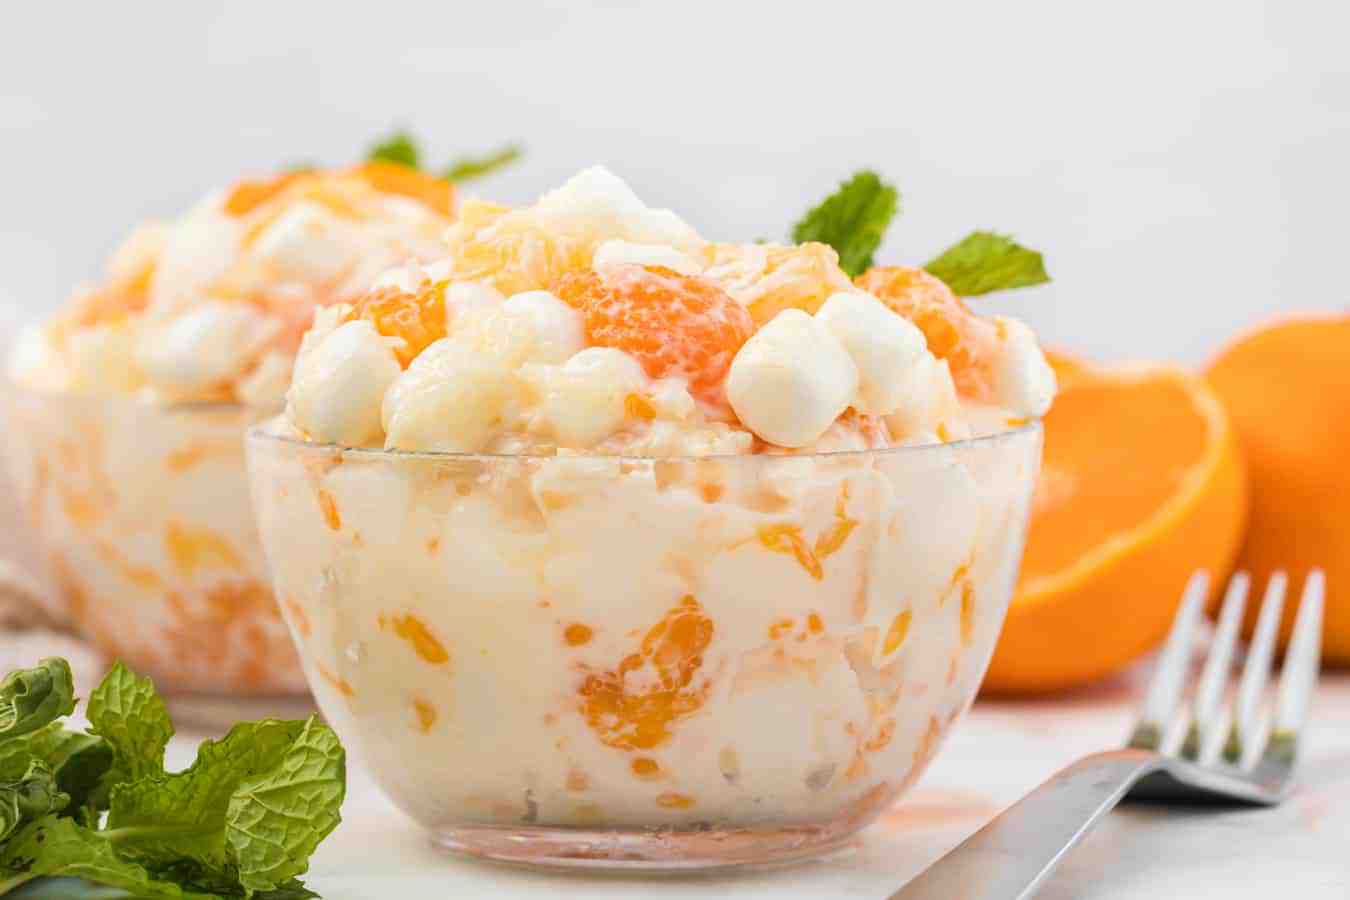 This tasty and creamy 6-cup ambrosia fruit salad is the simplest thing to make and is forever a hit for kiddos and adults alike at any gathering!